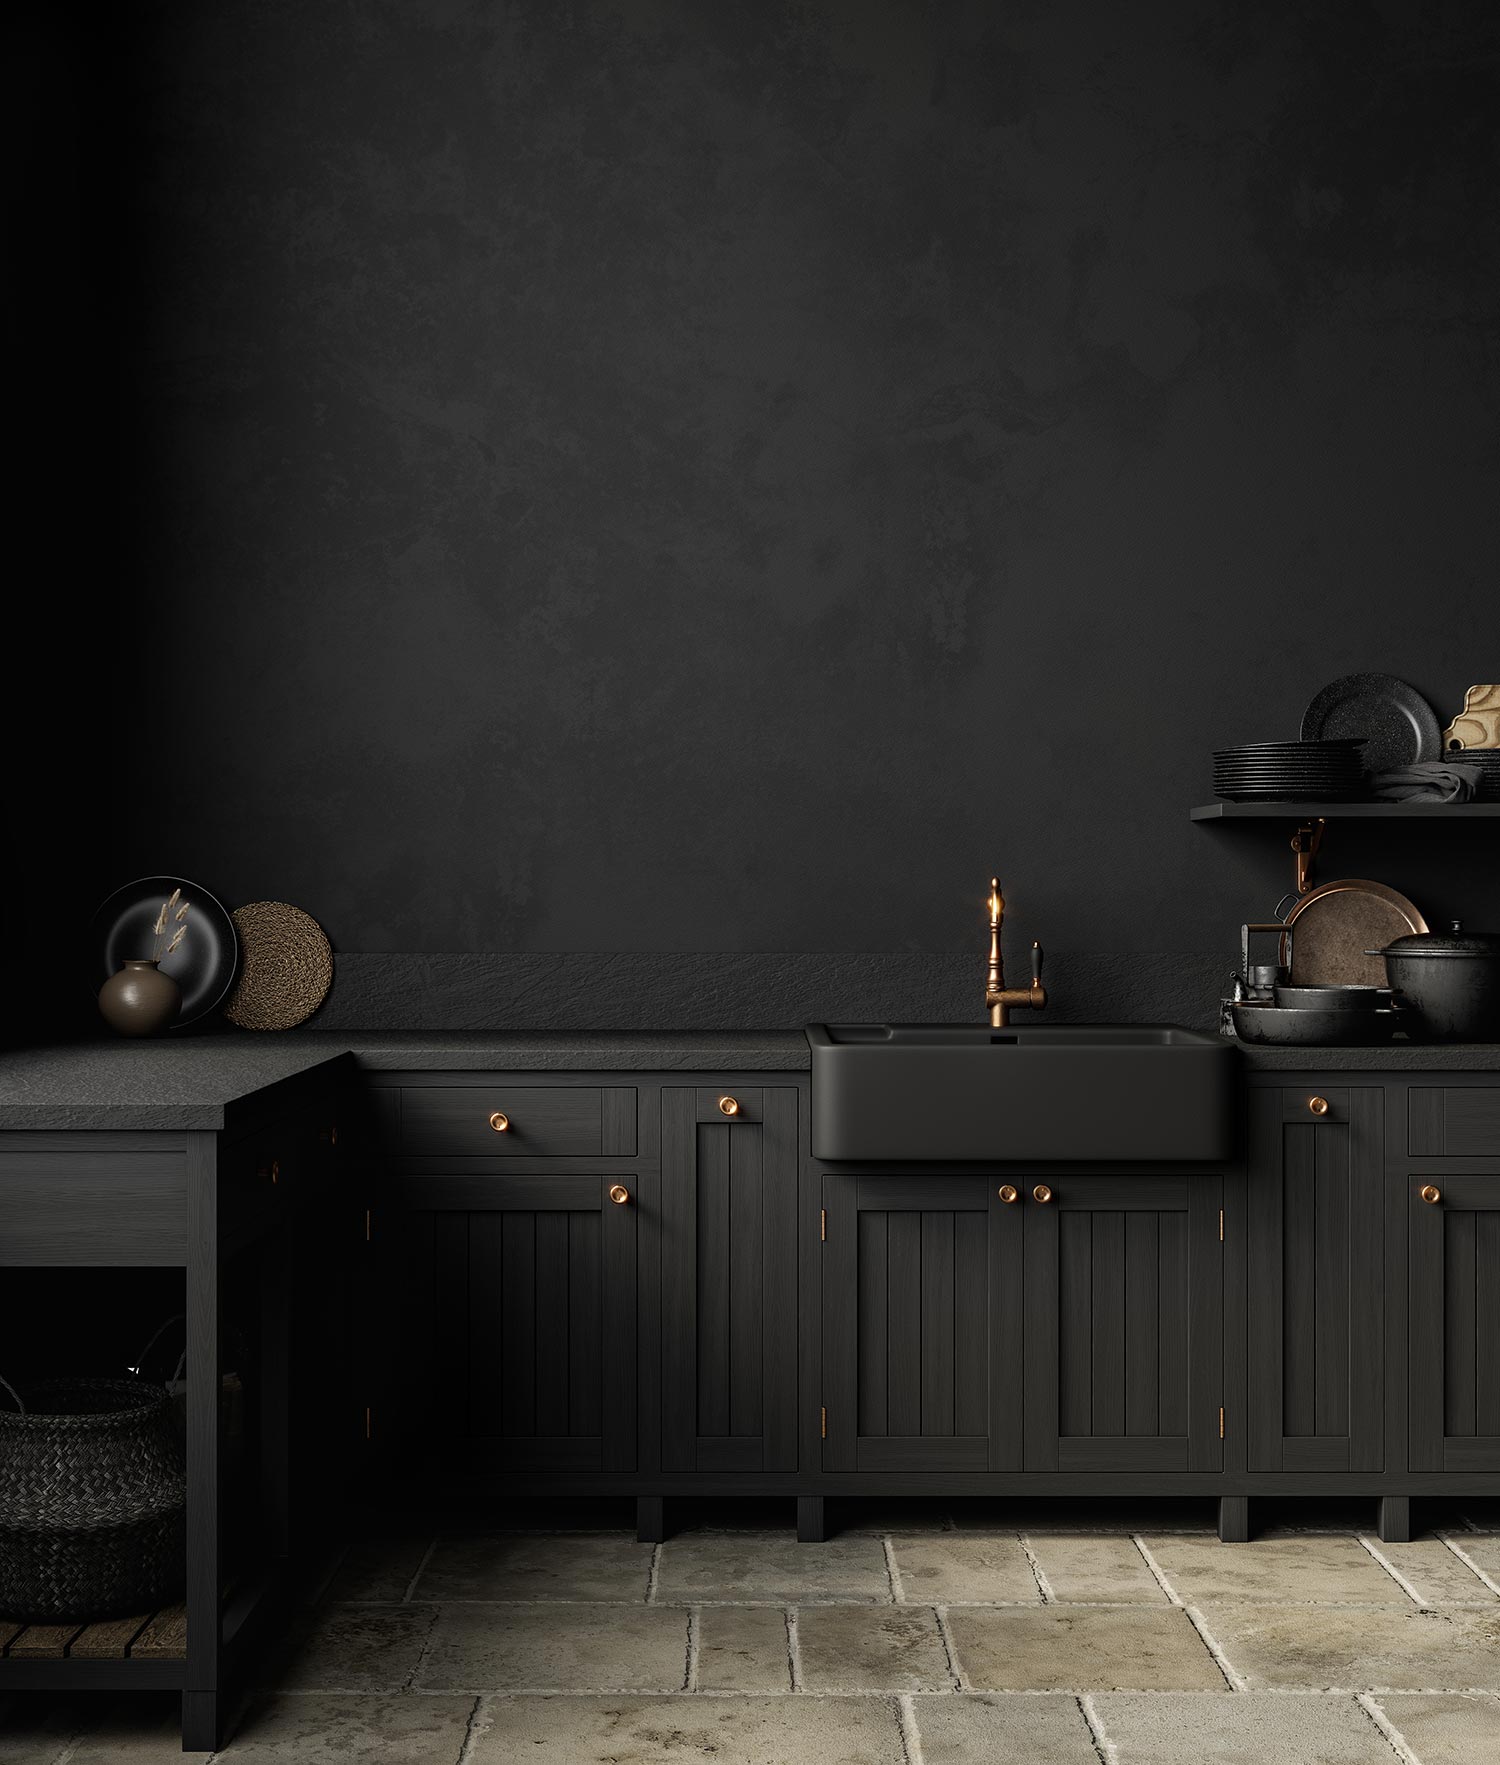 Black kitchen interior with sink, furniture, dishes and decor